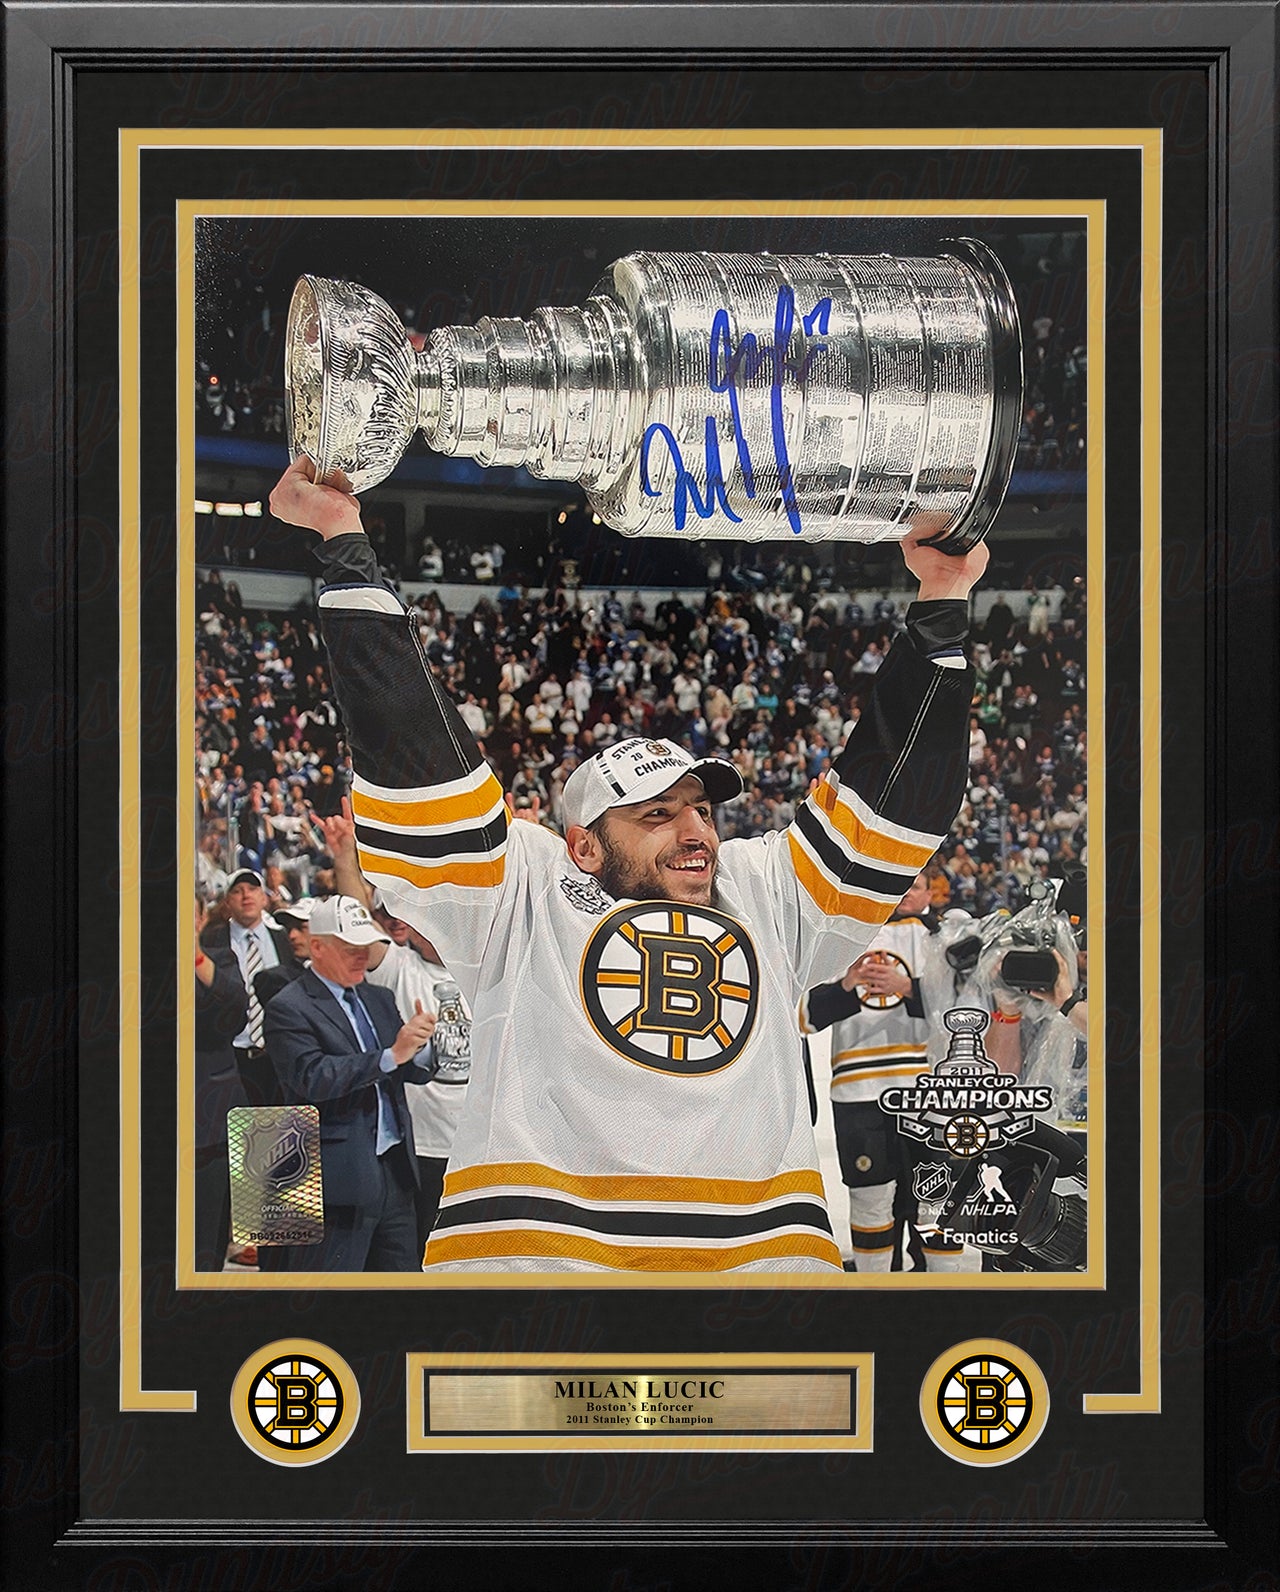 Milan Lucic 2011 Stanley Cup Boston Bruins Autographed 16" x 20" Framed Hockey Photo